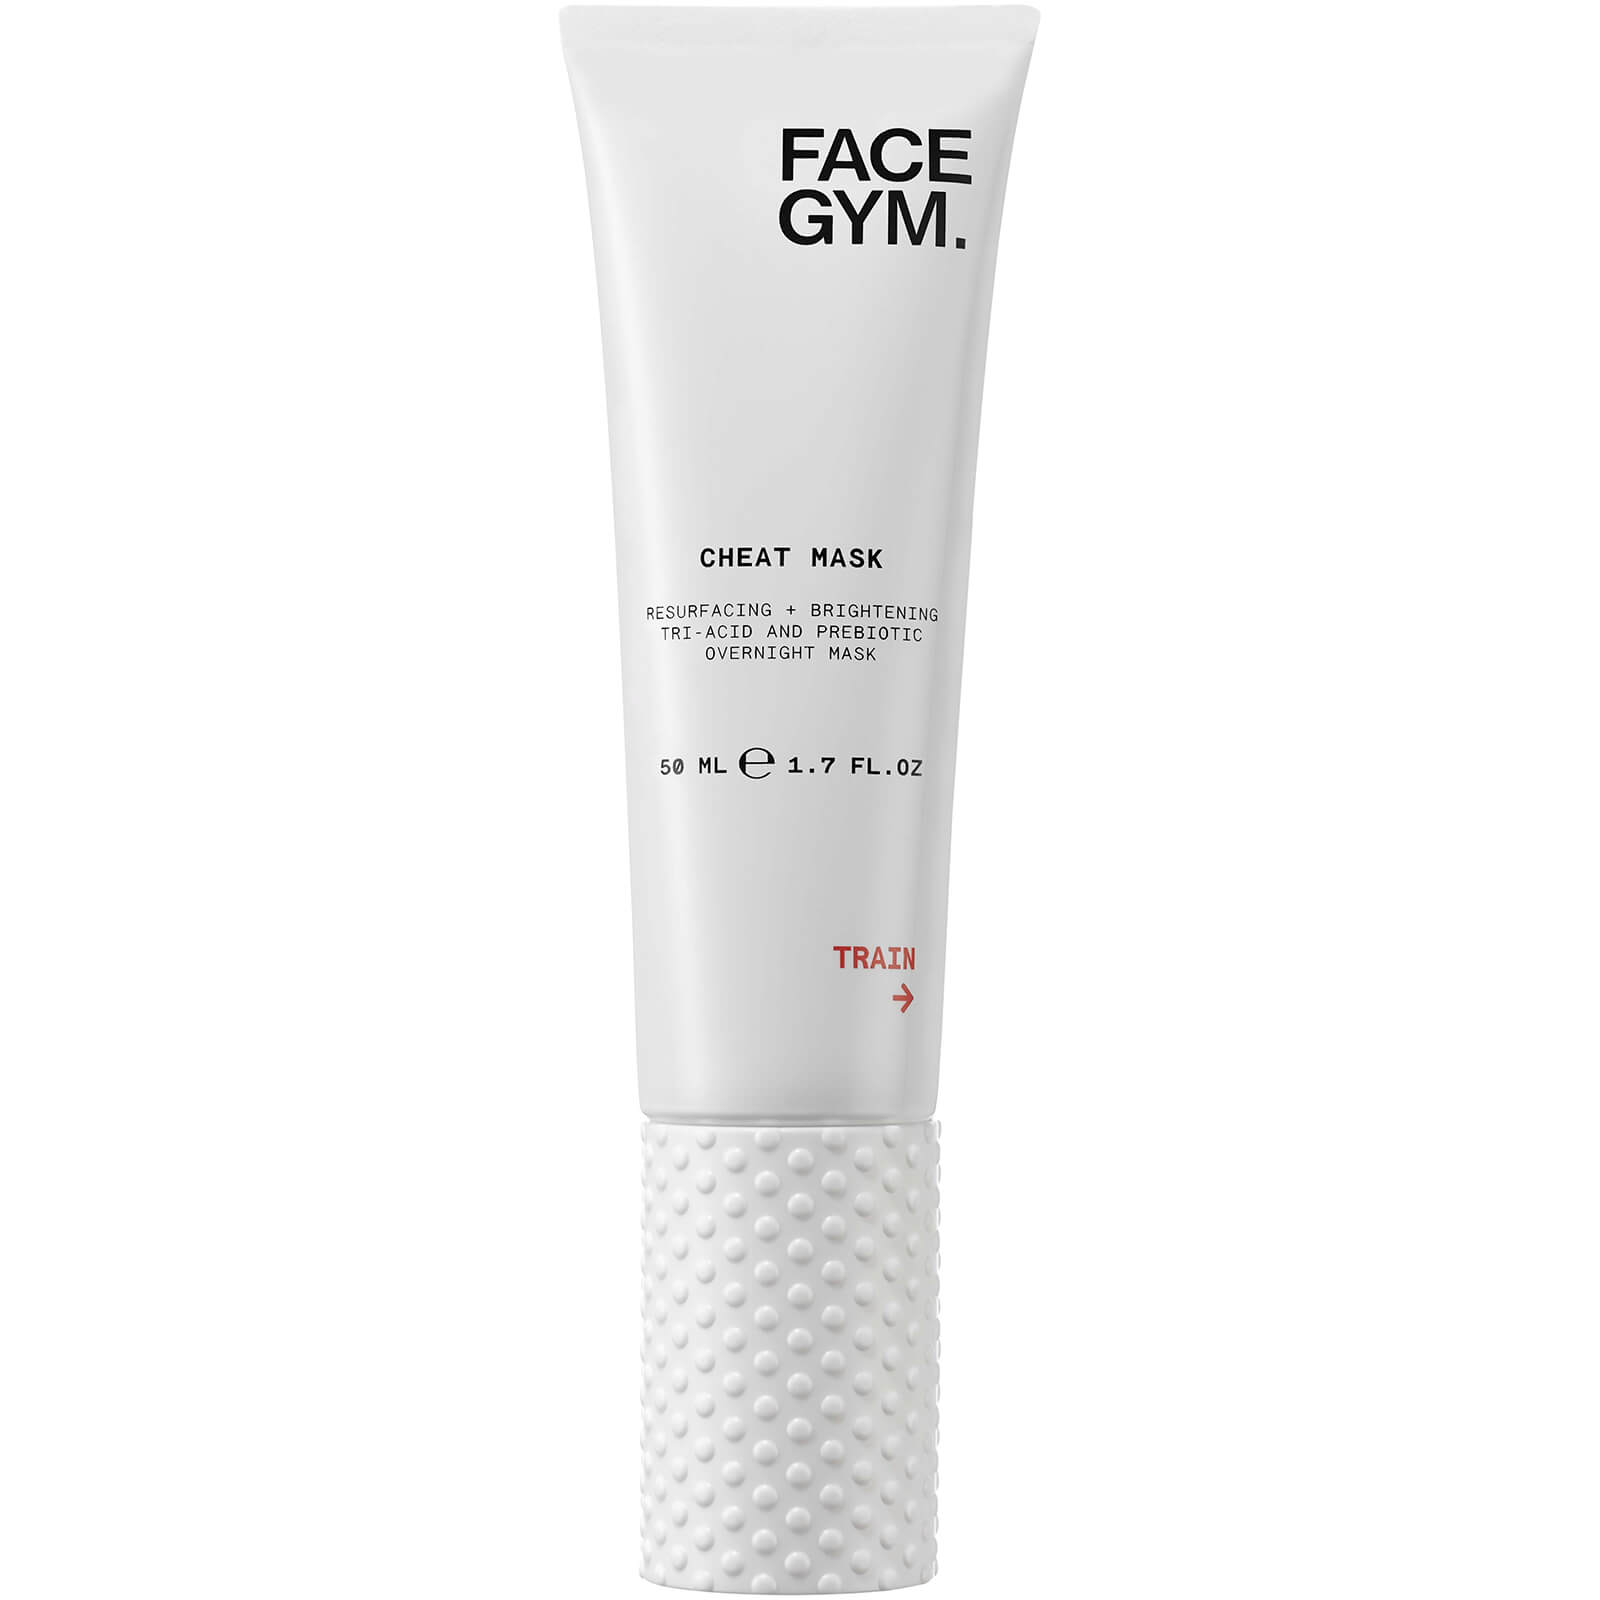 Image of FaceGym Cheat Mask Resurfacing and Brightening Tri-Acid and Prebiotic Overnight Mask (Various Sizes) - 50ml